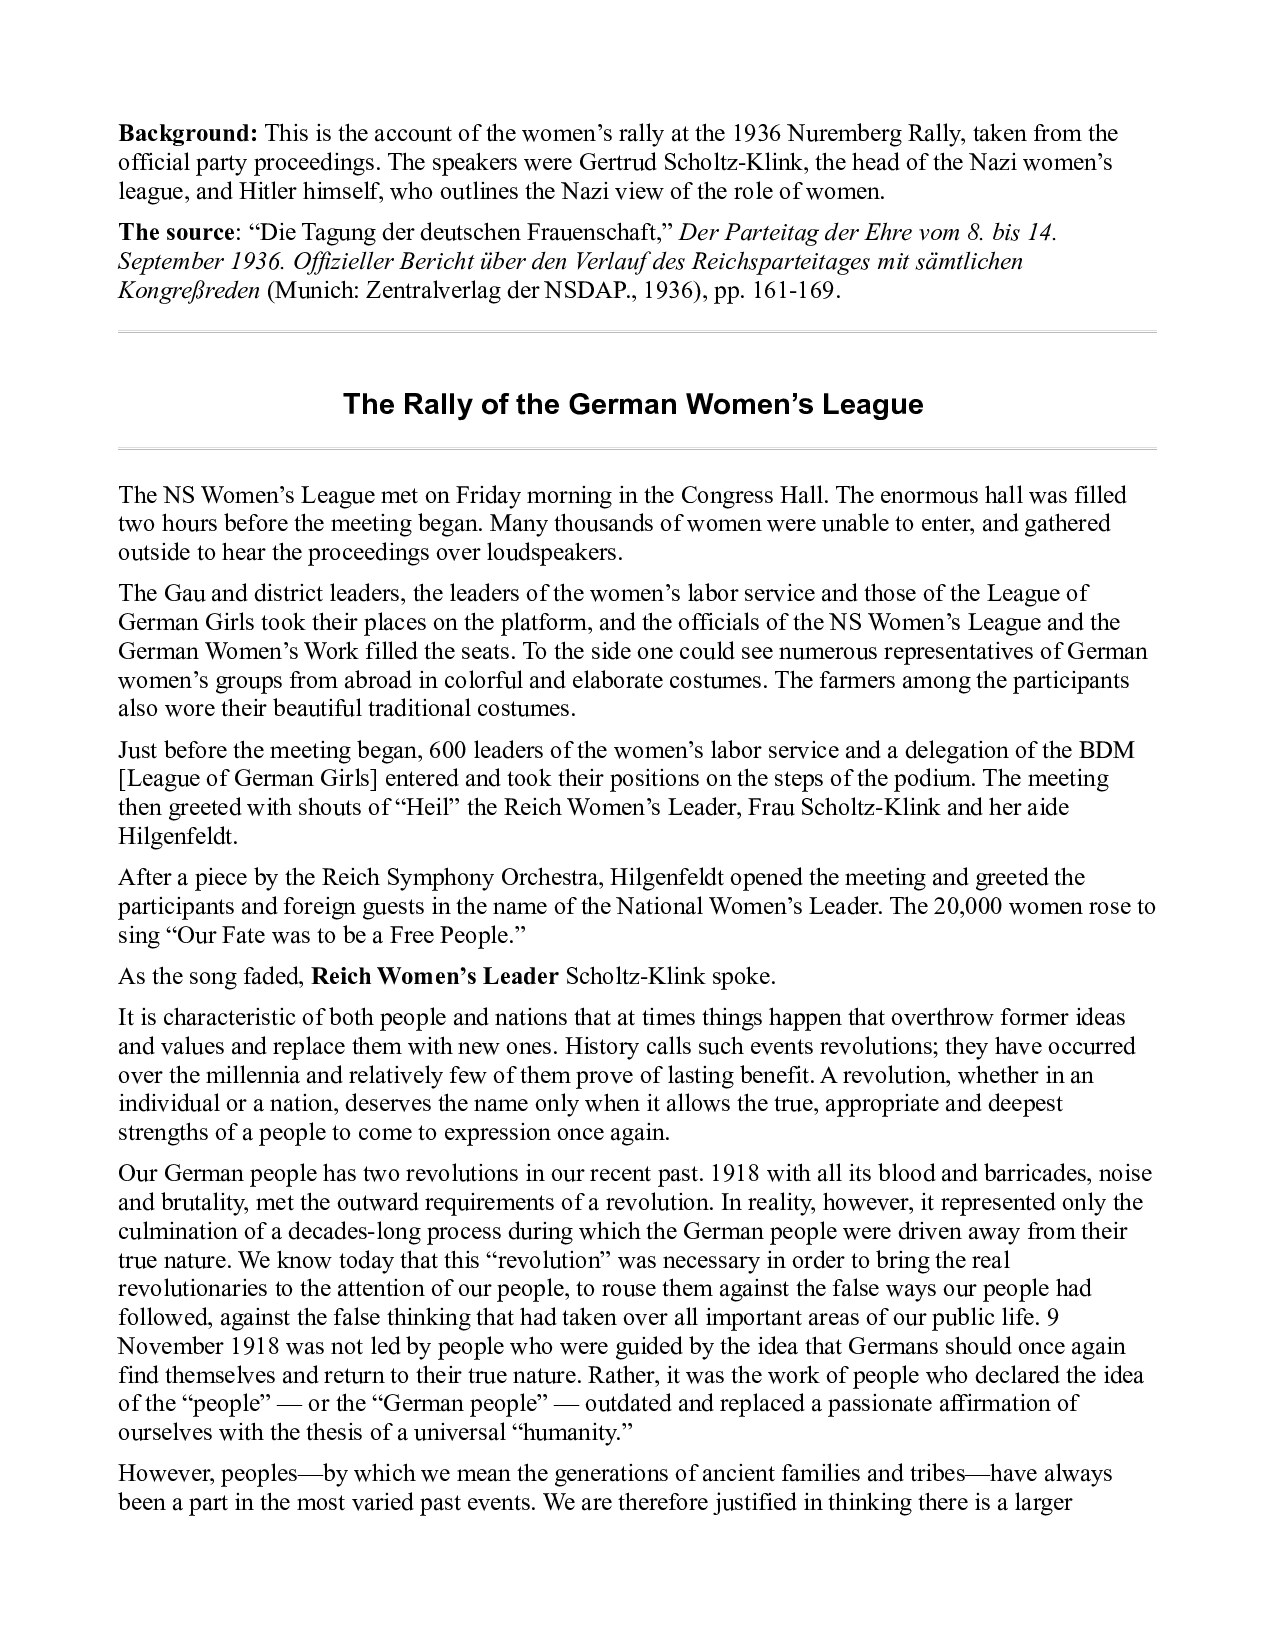 NSDAP; The Rally of the German Womens League